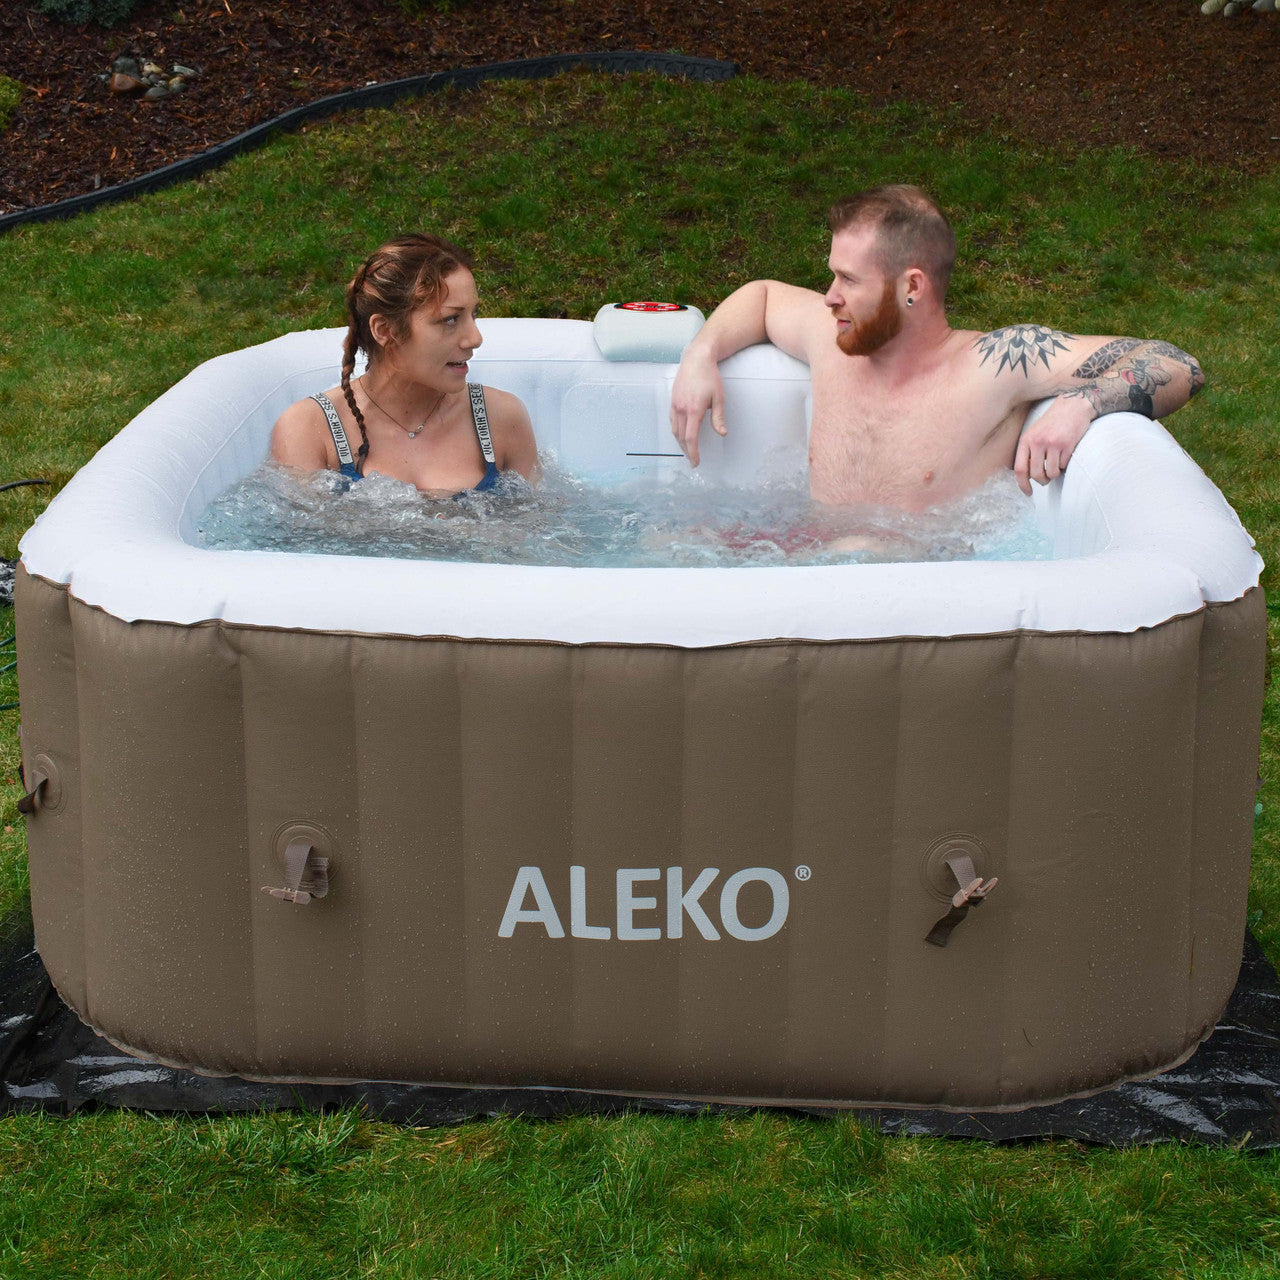 Inflatable Jetted 4-Person Square Hot Tub & Cover - 160 gal